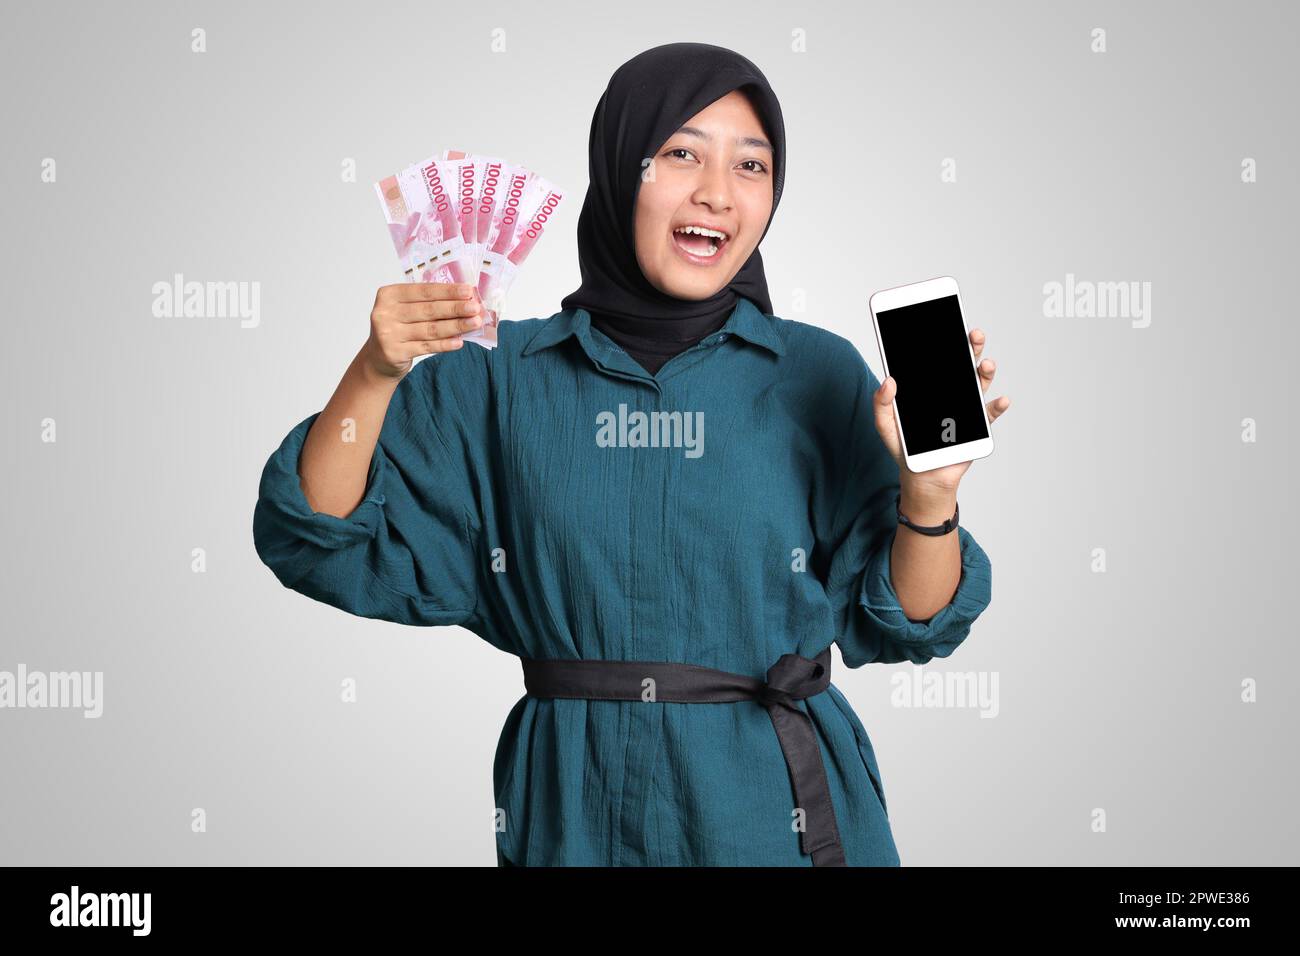 Portrait of excited Asian muslim woman with hijab, showing one hundred thousand rupiah while showing blank screen mockup mobile phone. Financial and s Stock Photo